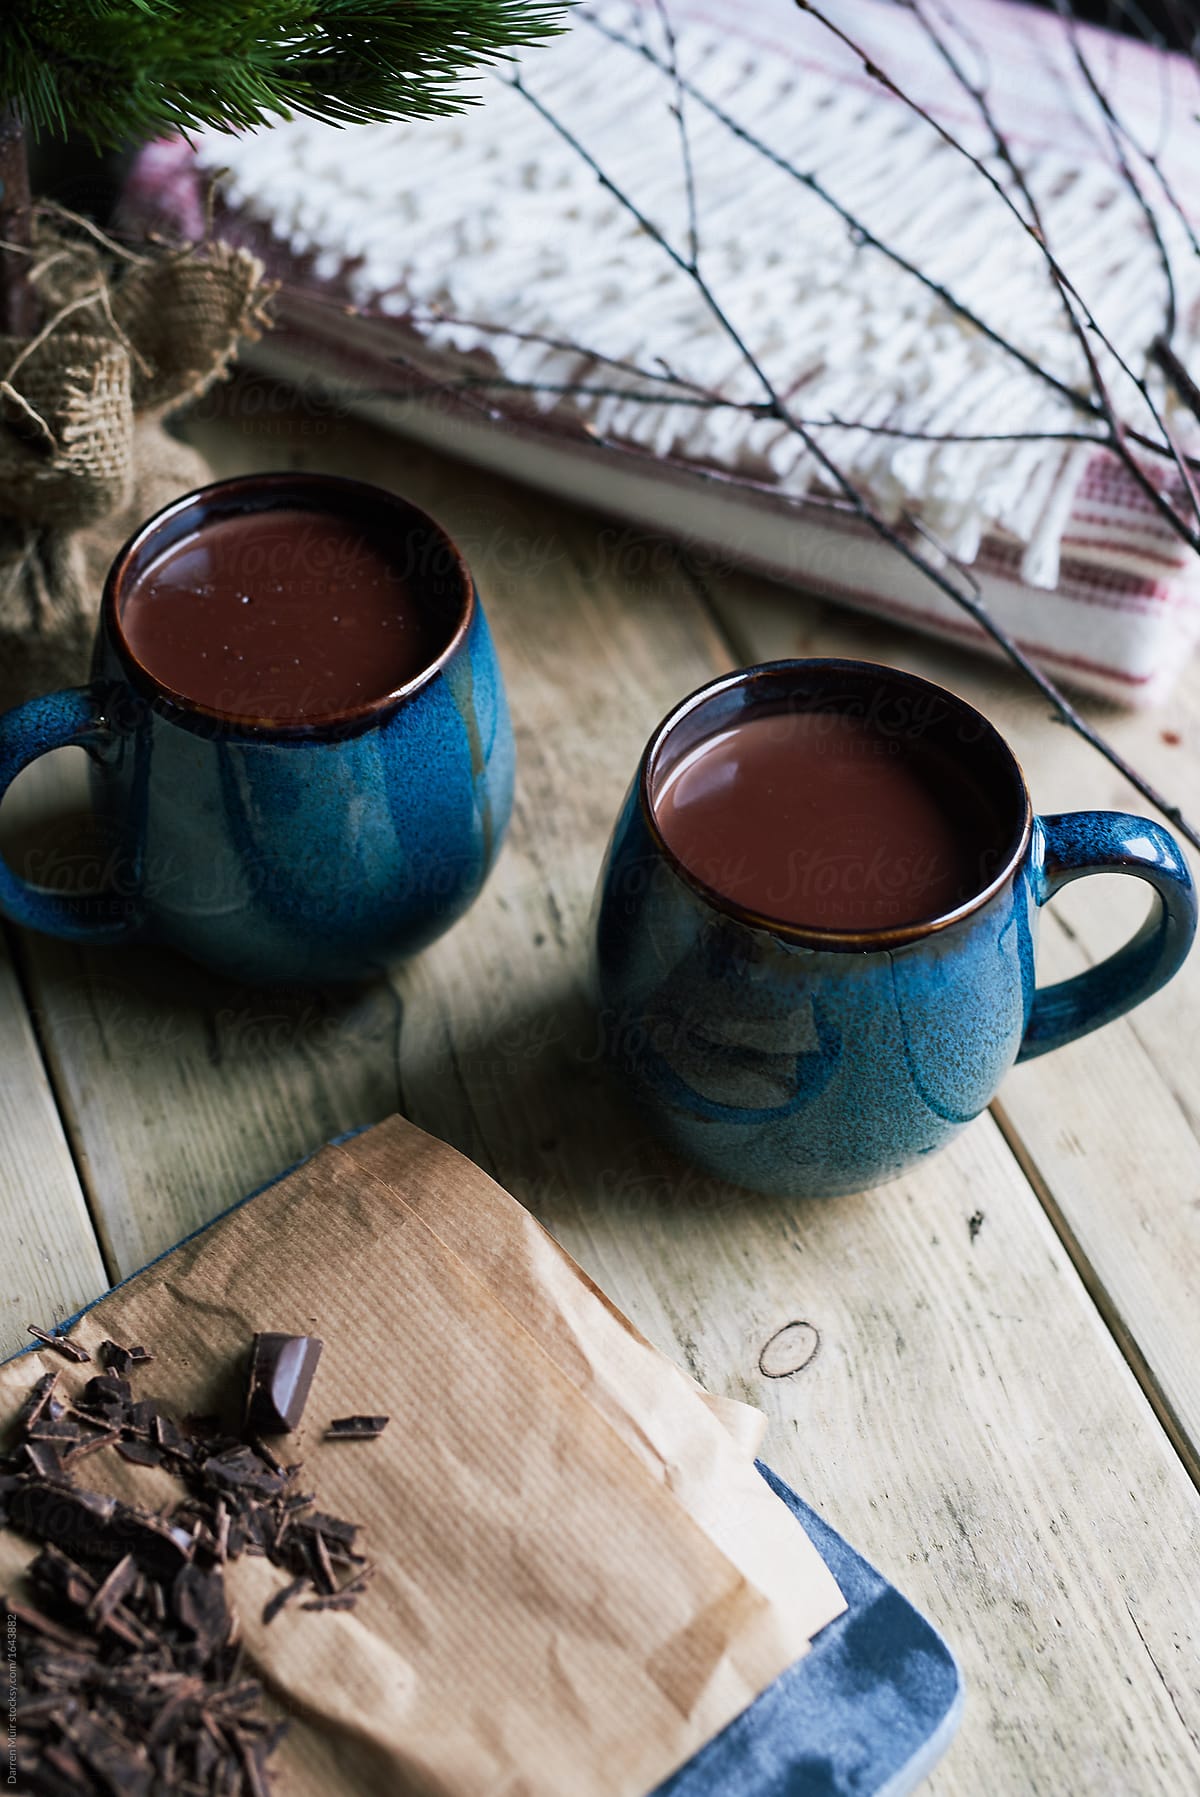 Hot chocolate drink on wooden table.